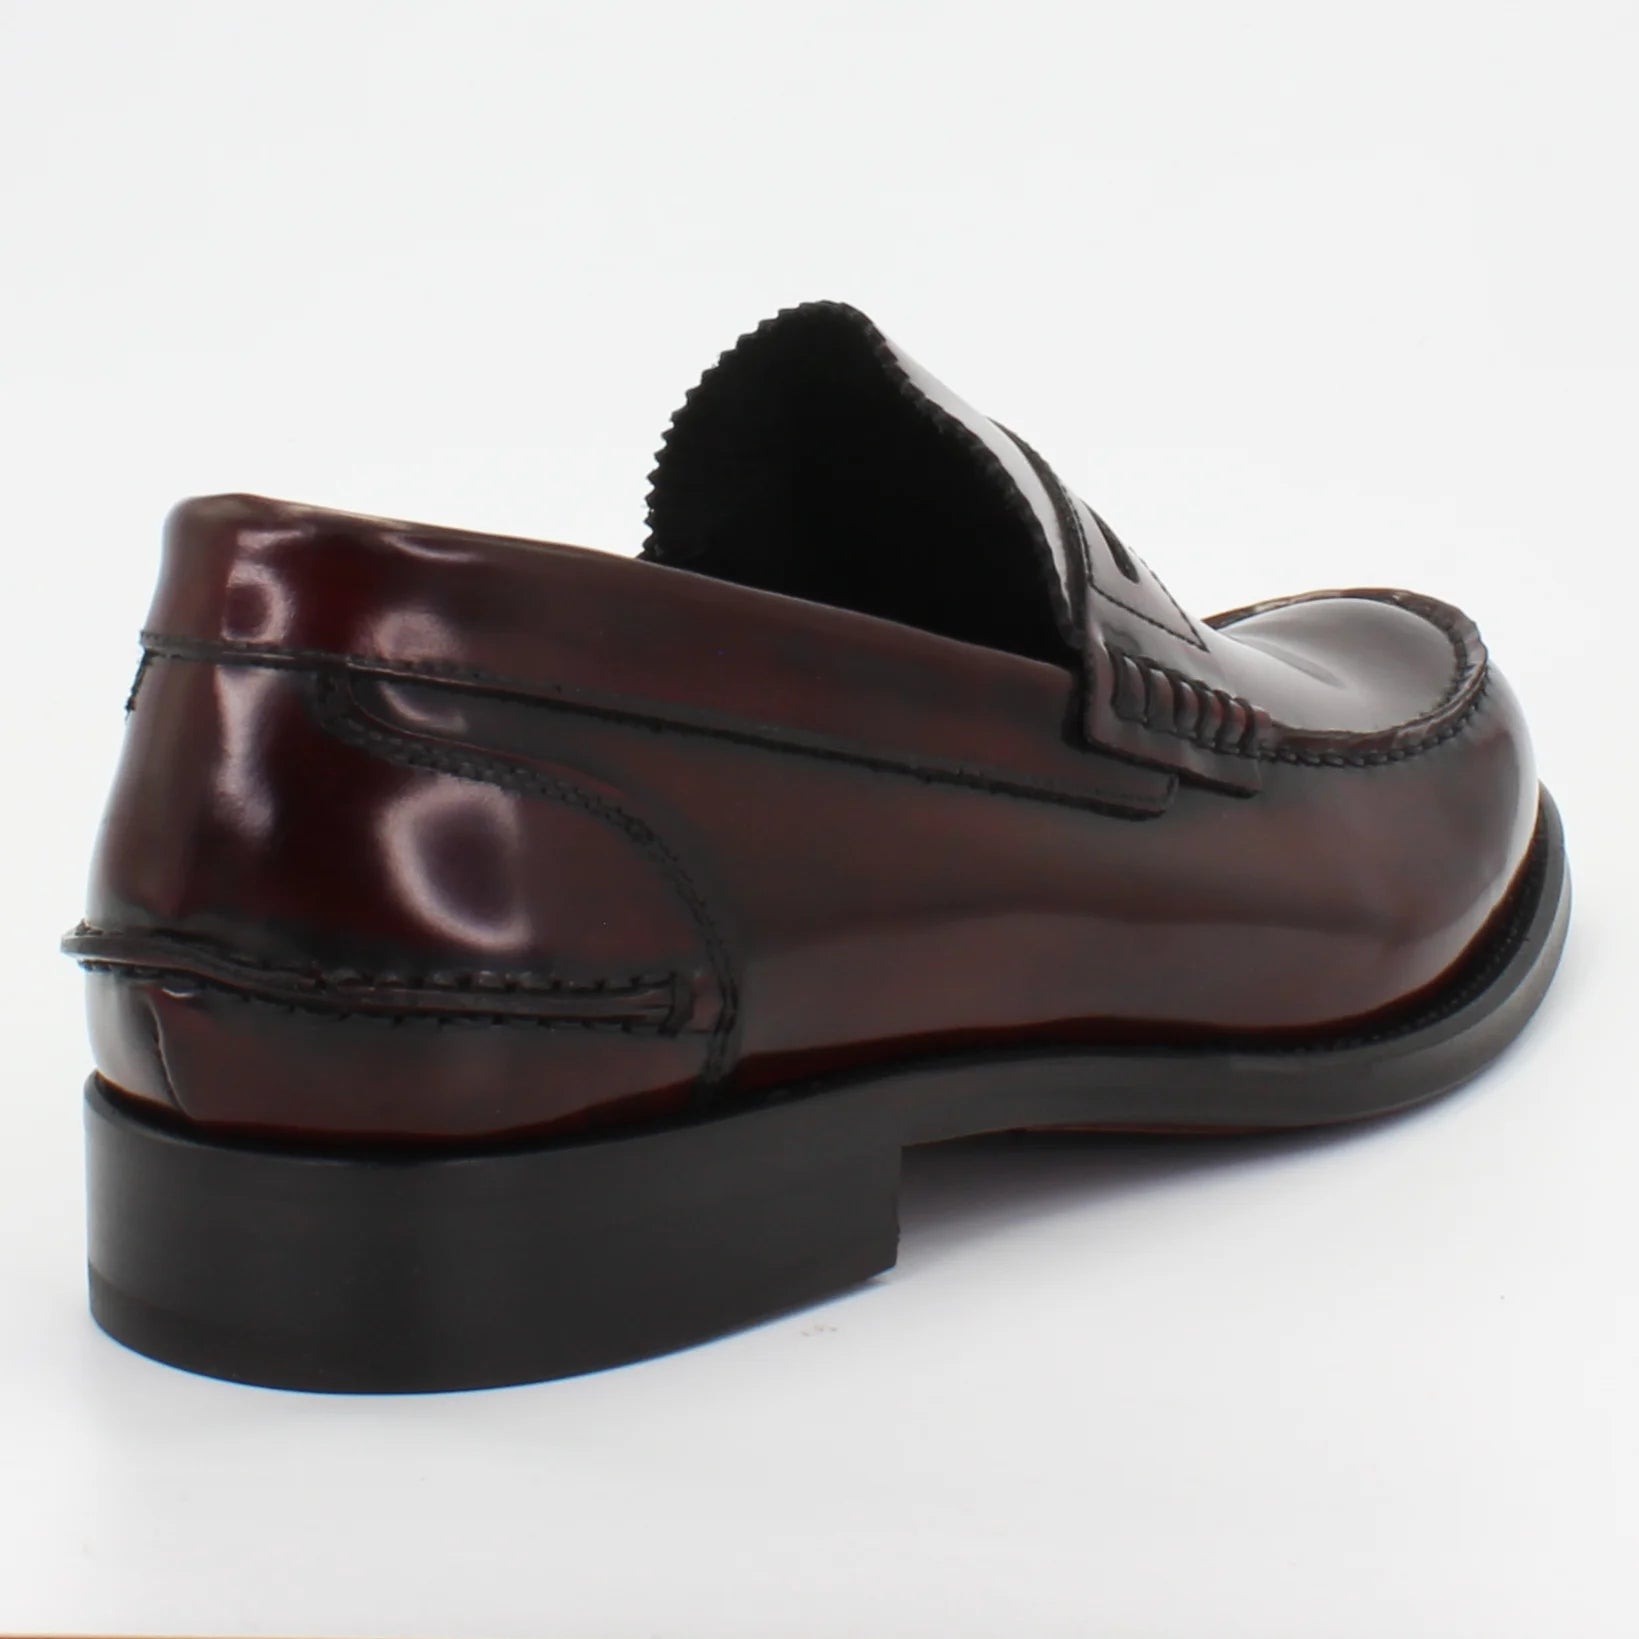 Shop Handmade Italian Leather Penny Loafer in Bordeaux (BRU8826) or browse our range of hand-made Italian shoes for men in leather or suede in-store at Aliverti Cape Town, or shop online. We deliver in South Africa & offer multiple payment plans as well as accept multiple safe & secure payment methods.